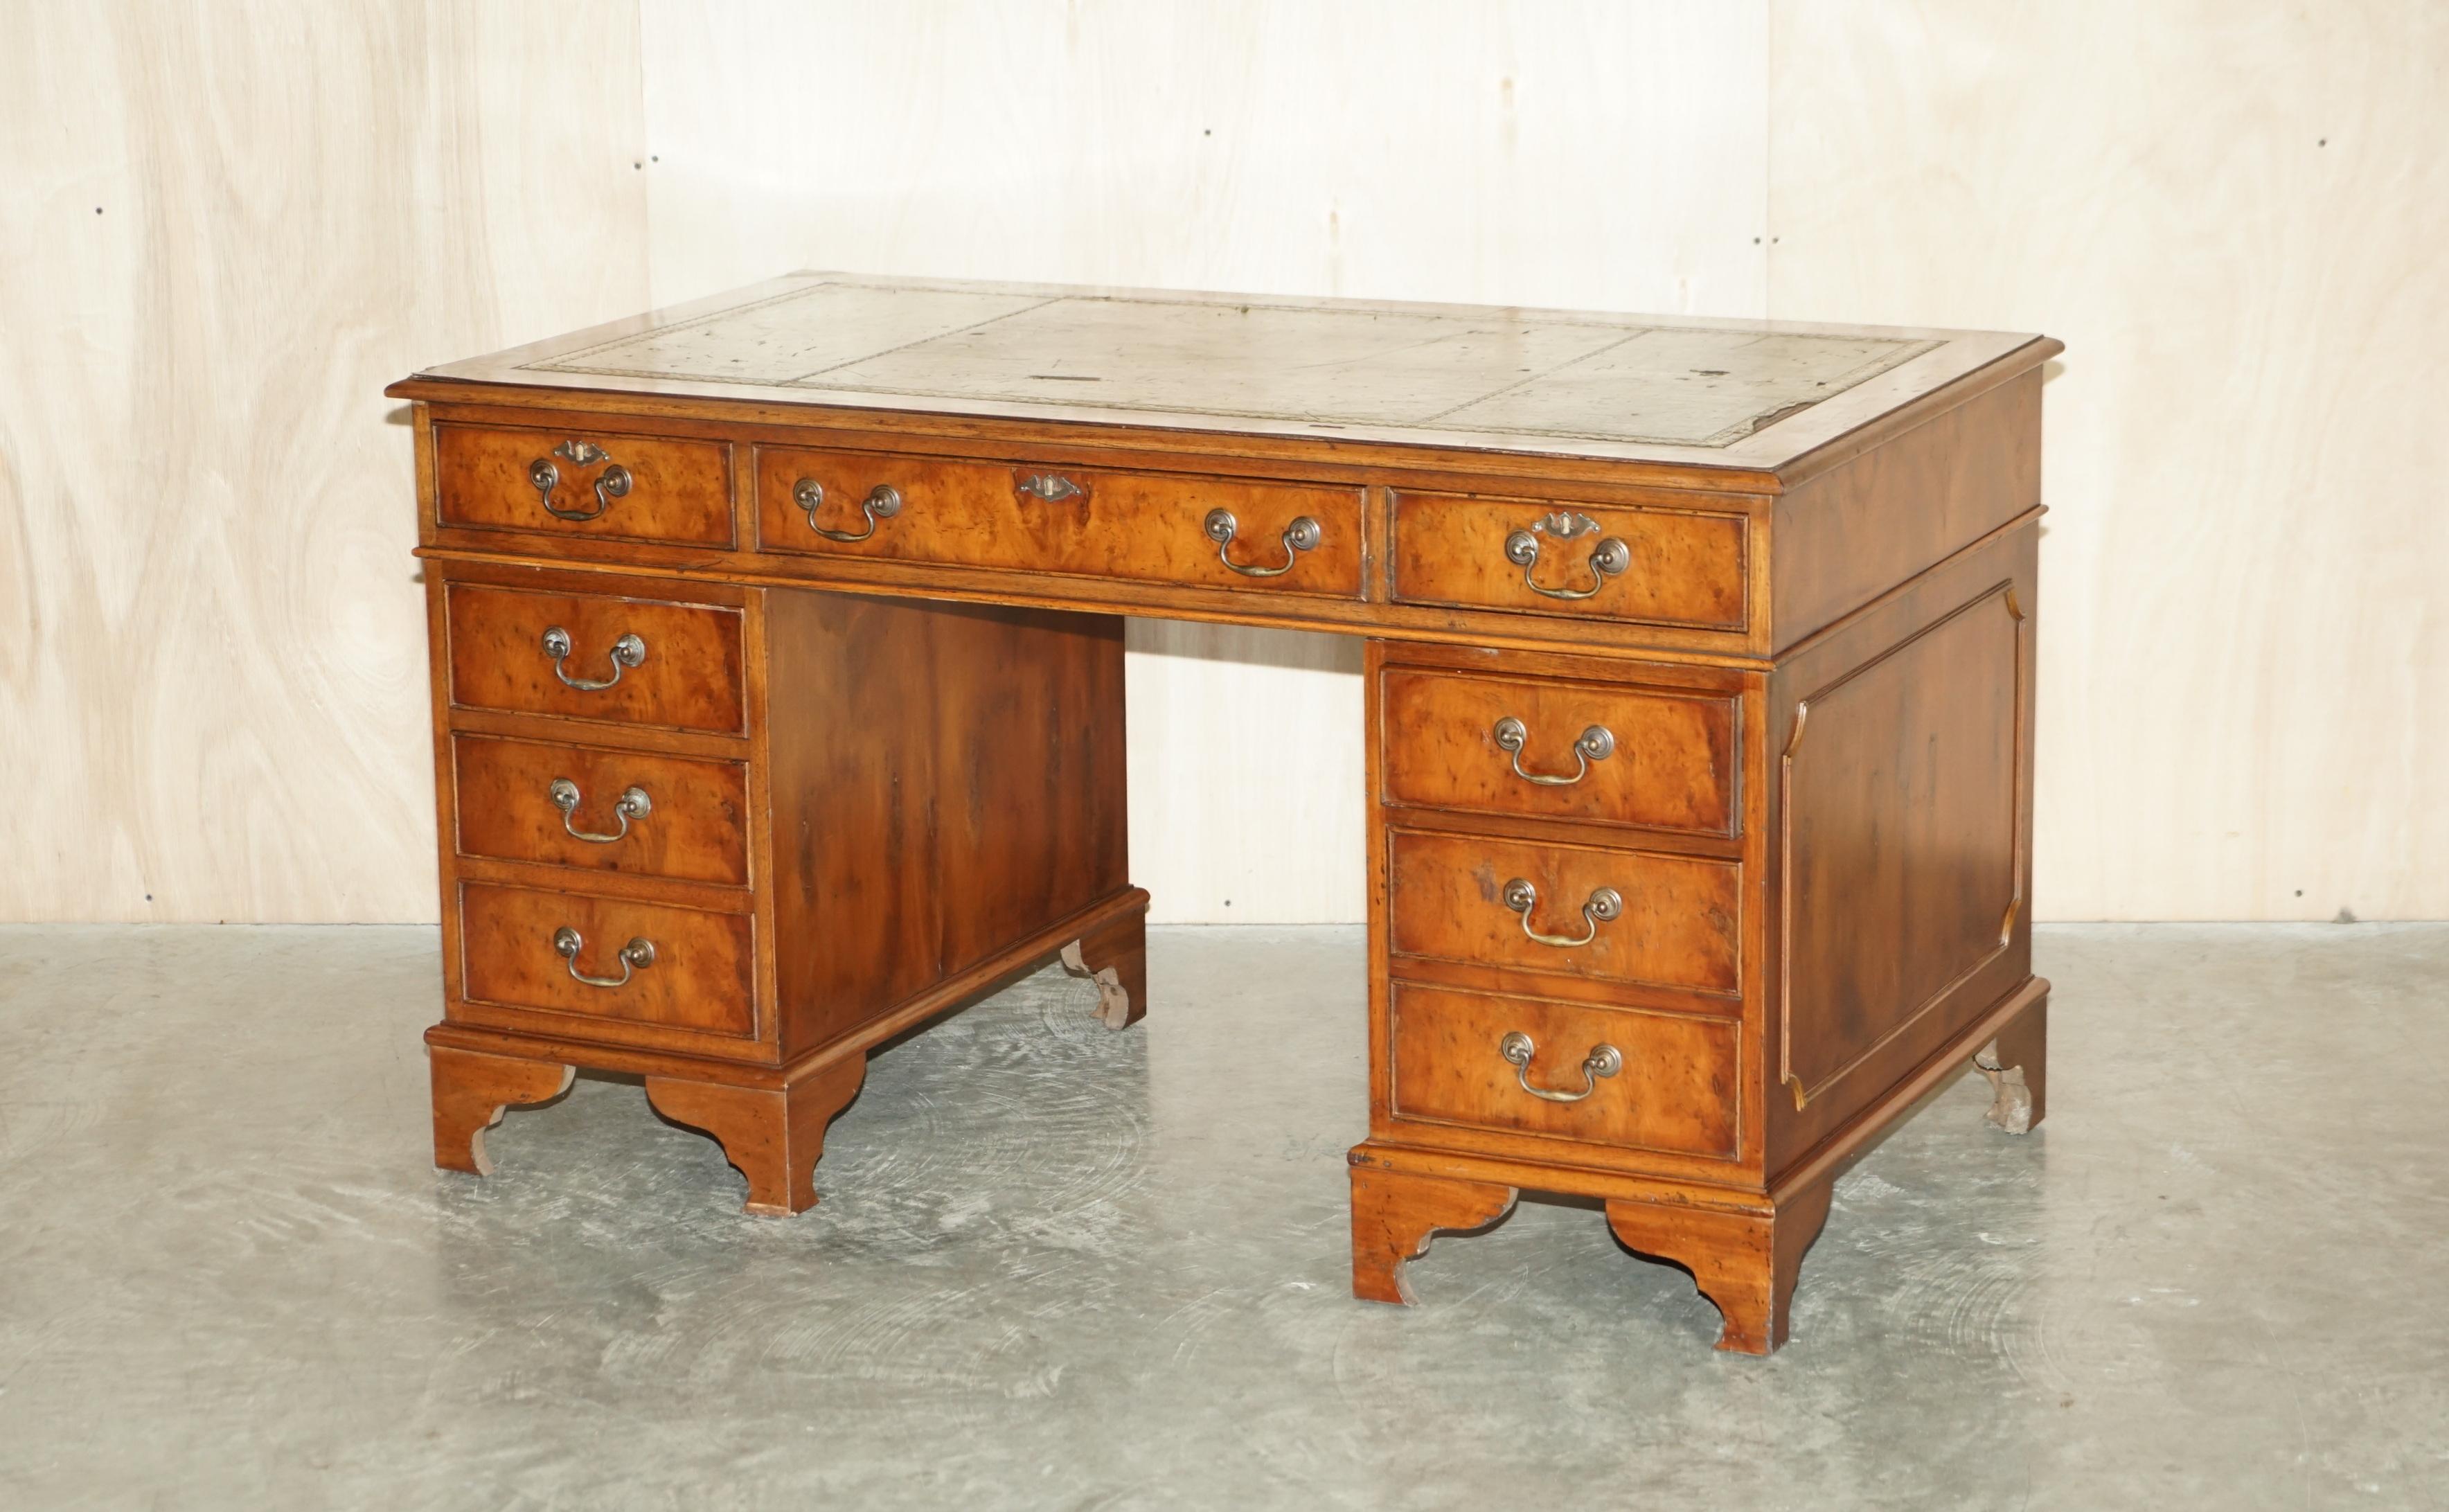 Royal House Antiques

Royal House Antiques is delighted to offer for sale this lovely vintage Burr Walnut twin pedestal partner desk with original distressed green leather top 

Please note the delivery fee listed is just a guide, it covers within